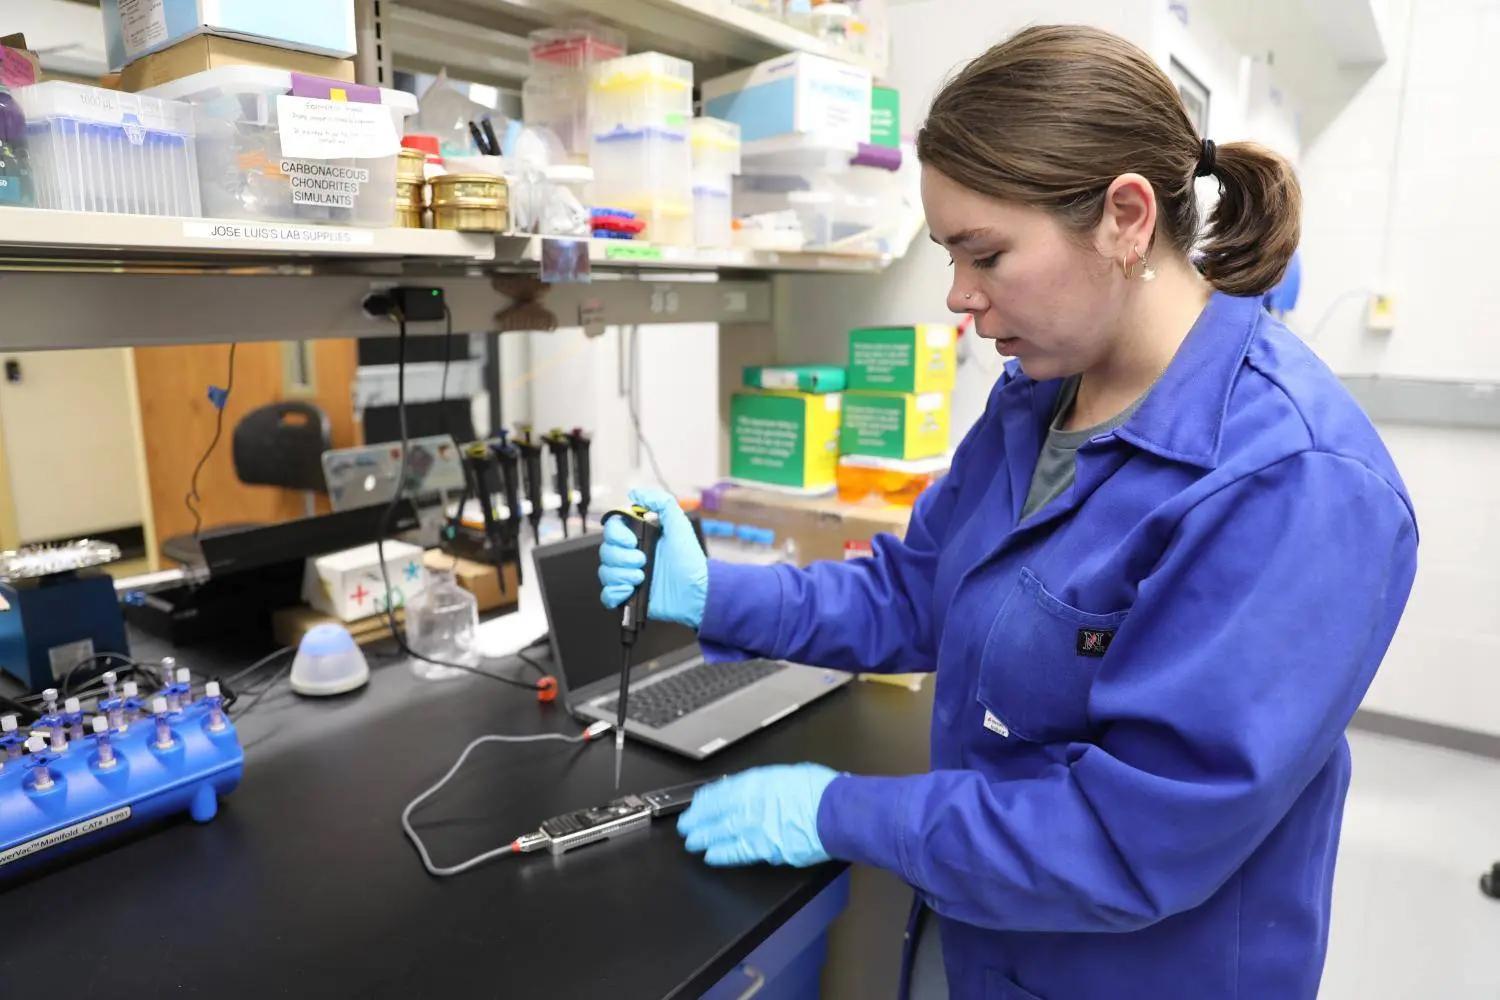 Georgia Tech Ph.D. student Jordan McKaig demonstrates how NASA astronauts onboard the International Space Station will use the MinION sequencing device to identify bacteria genomes. Credit: Georgia Tech